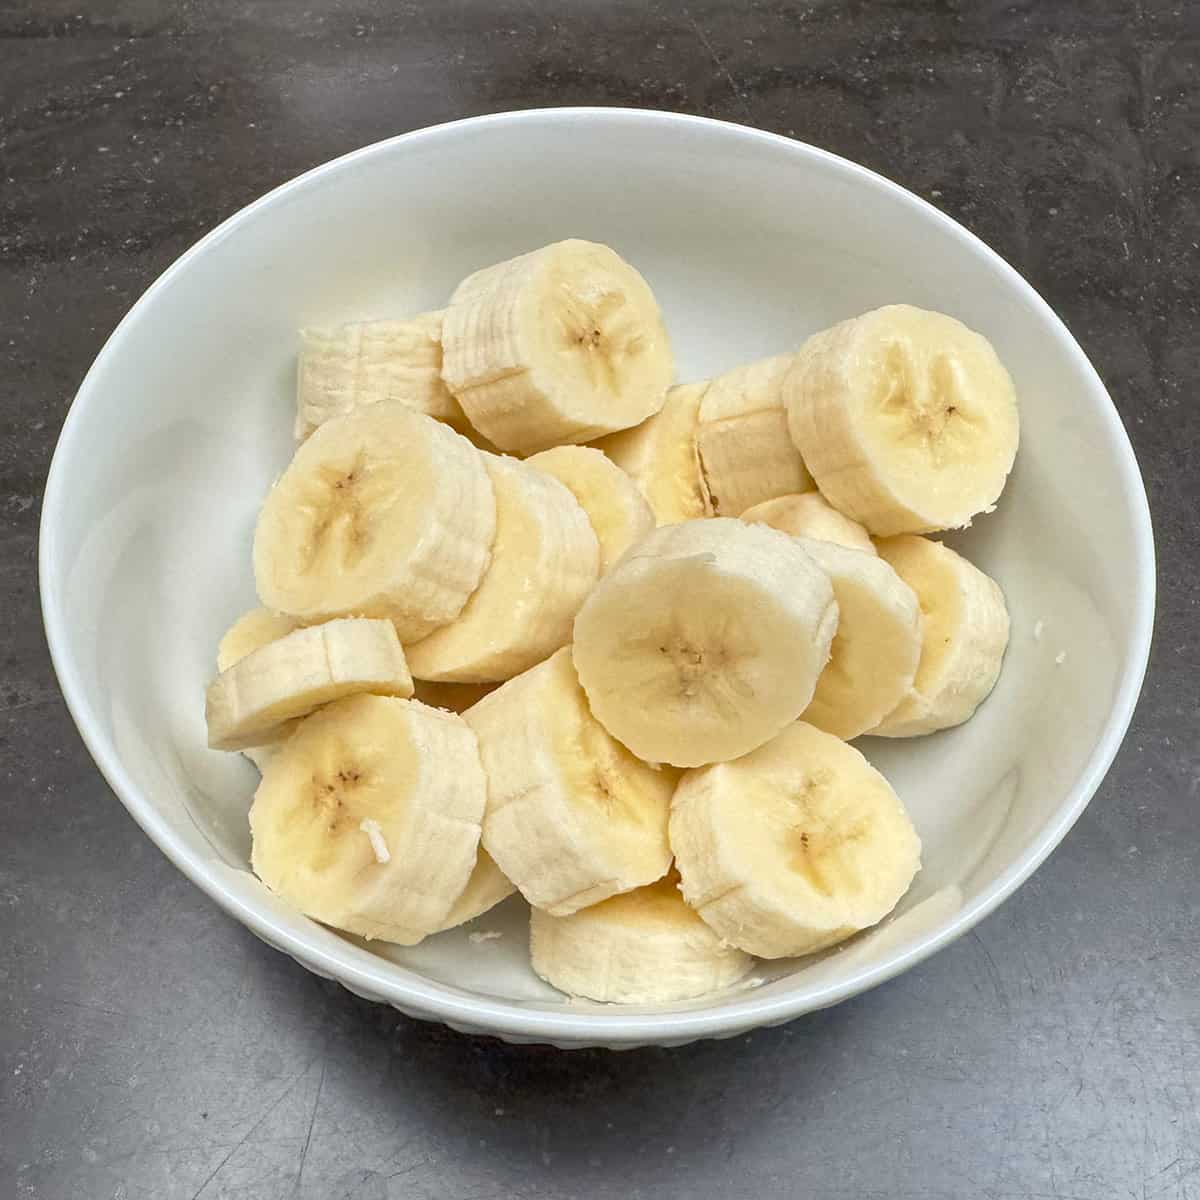 Cut up bananas in a small bowl.